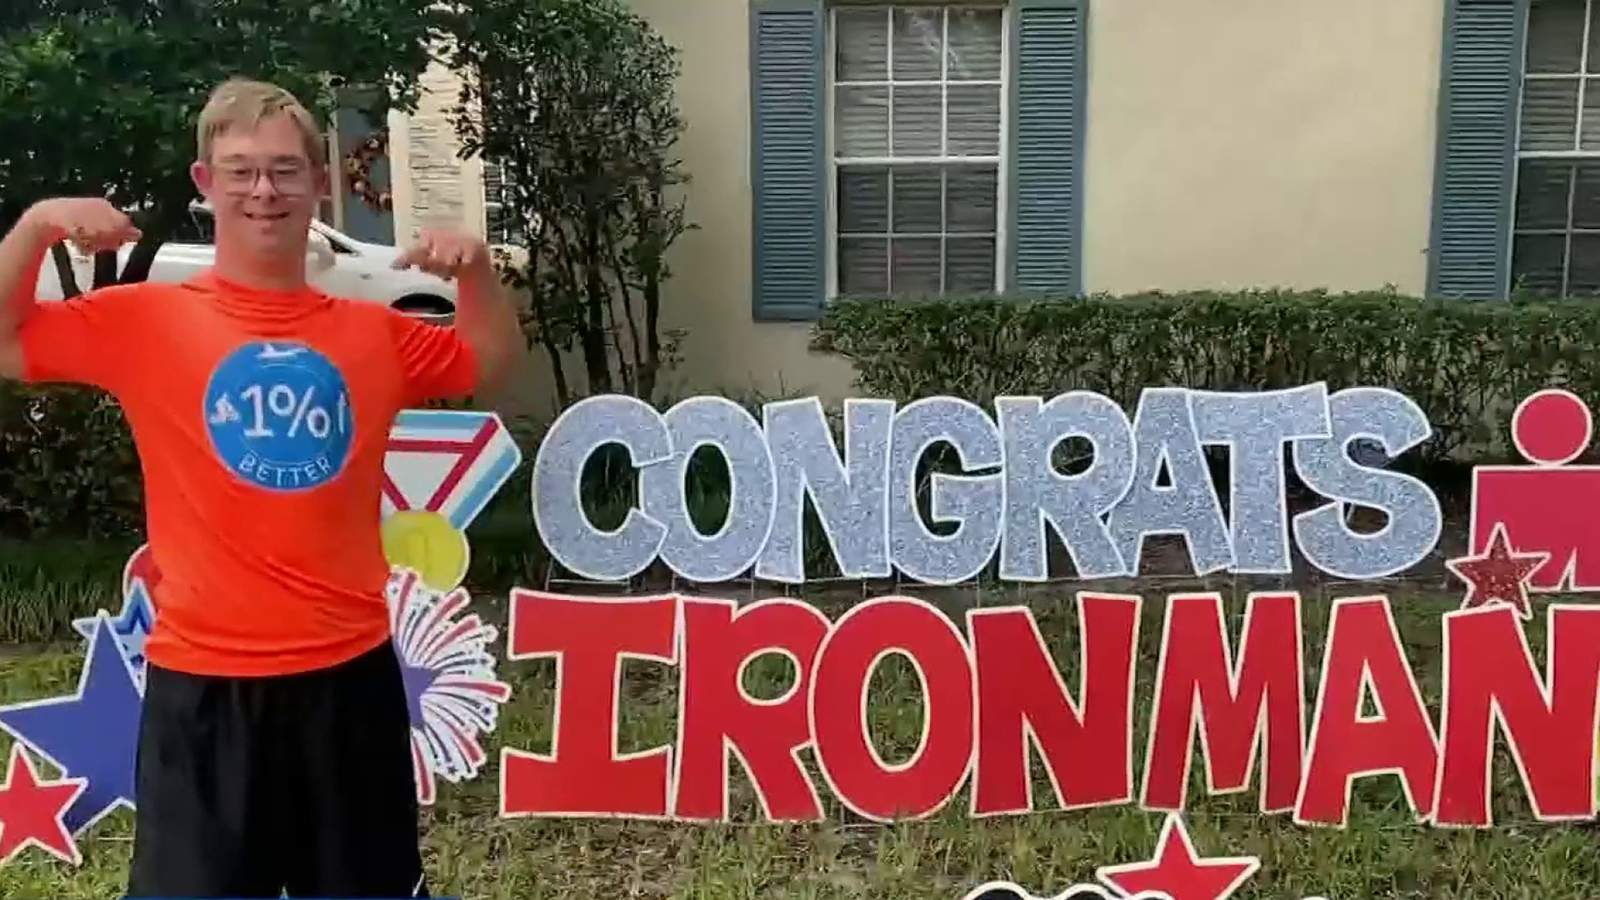 Orange County man with Down syndrome completes Ironman race